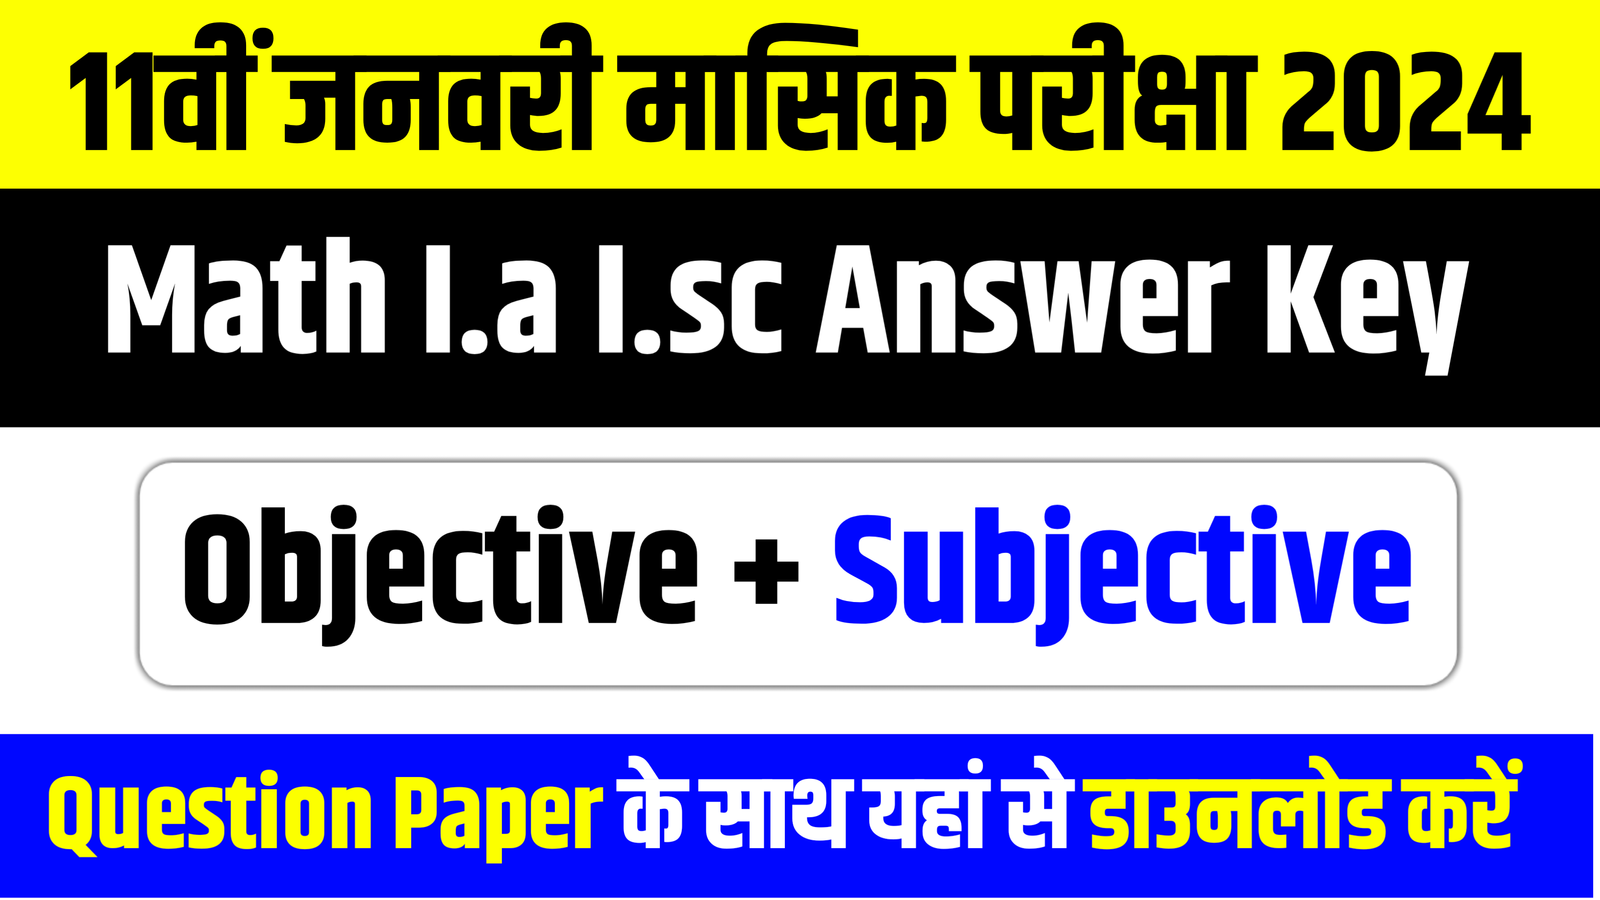 Bihar Board 11th Math Objective Subjective , 11th Math Monthly Exam January 2024 , 11th Math Question Paper , 11th Math 22 January Answer Key